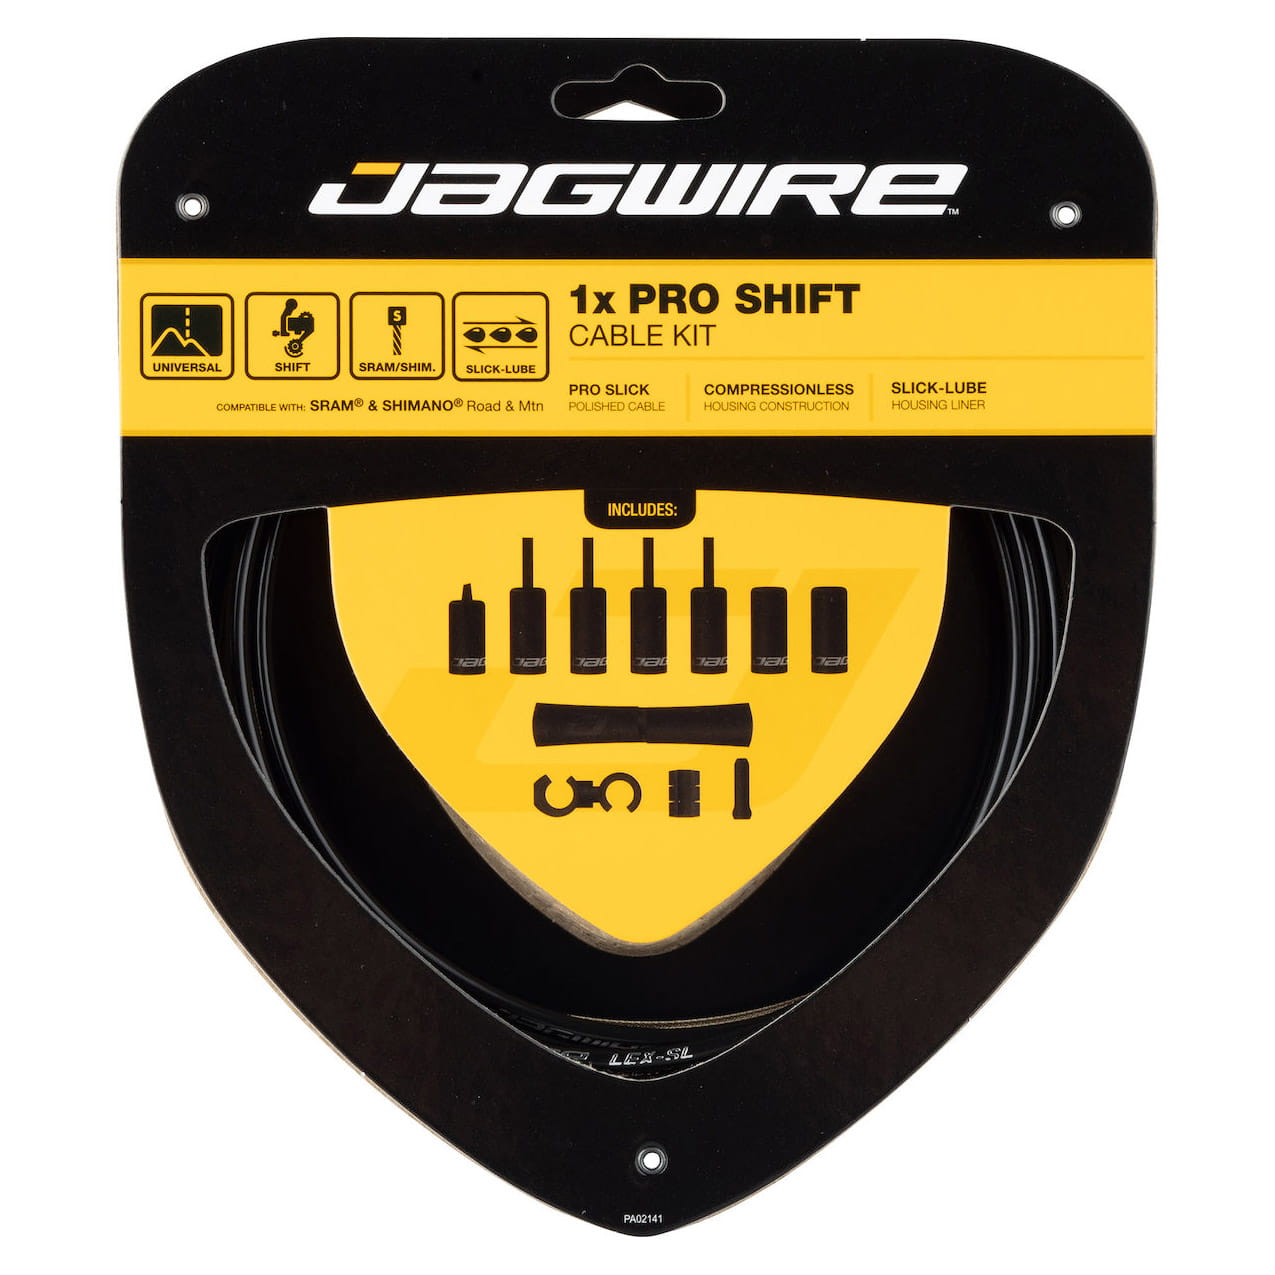 Jagwire 1x Pro Shift cable set Road & Mountain